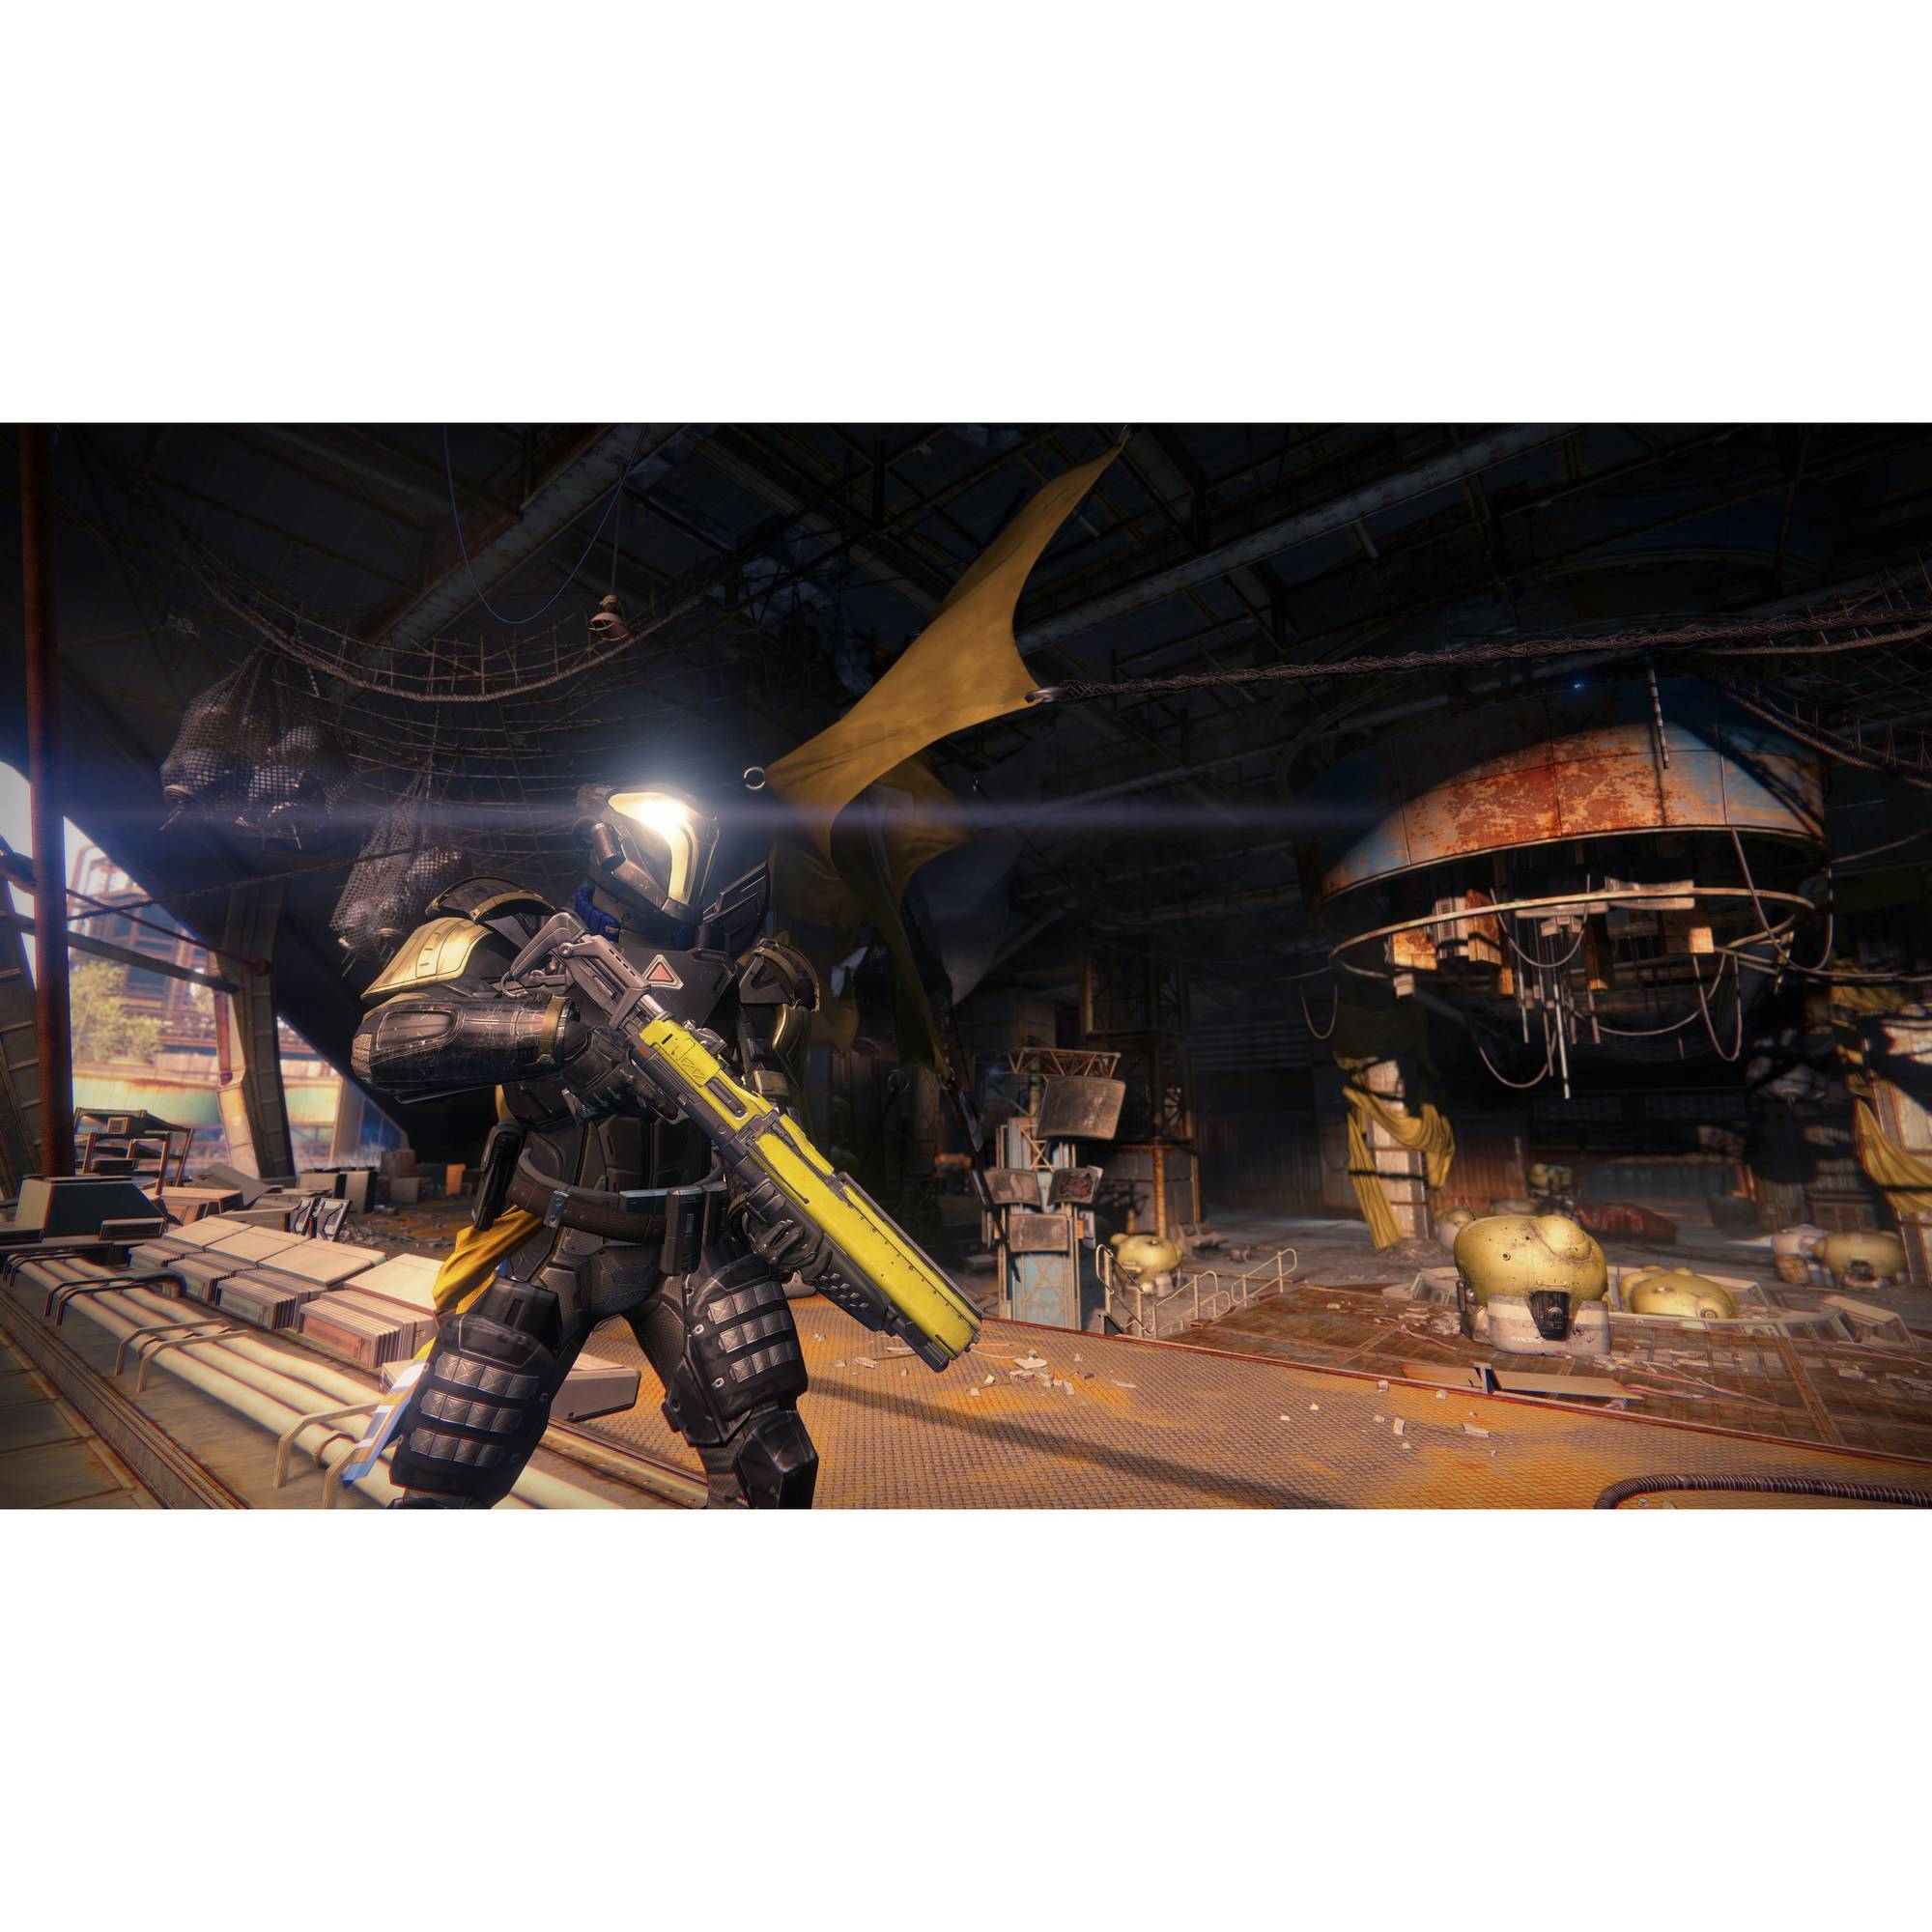 Destiny: The Taken King Legendary Edition, Activision, PlayStation 4, 047875874428 - image 21 of 31